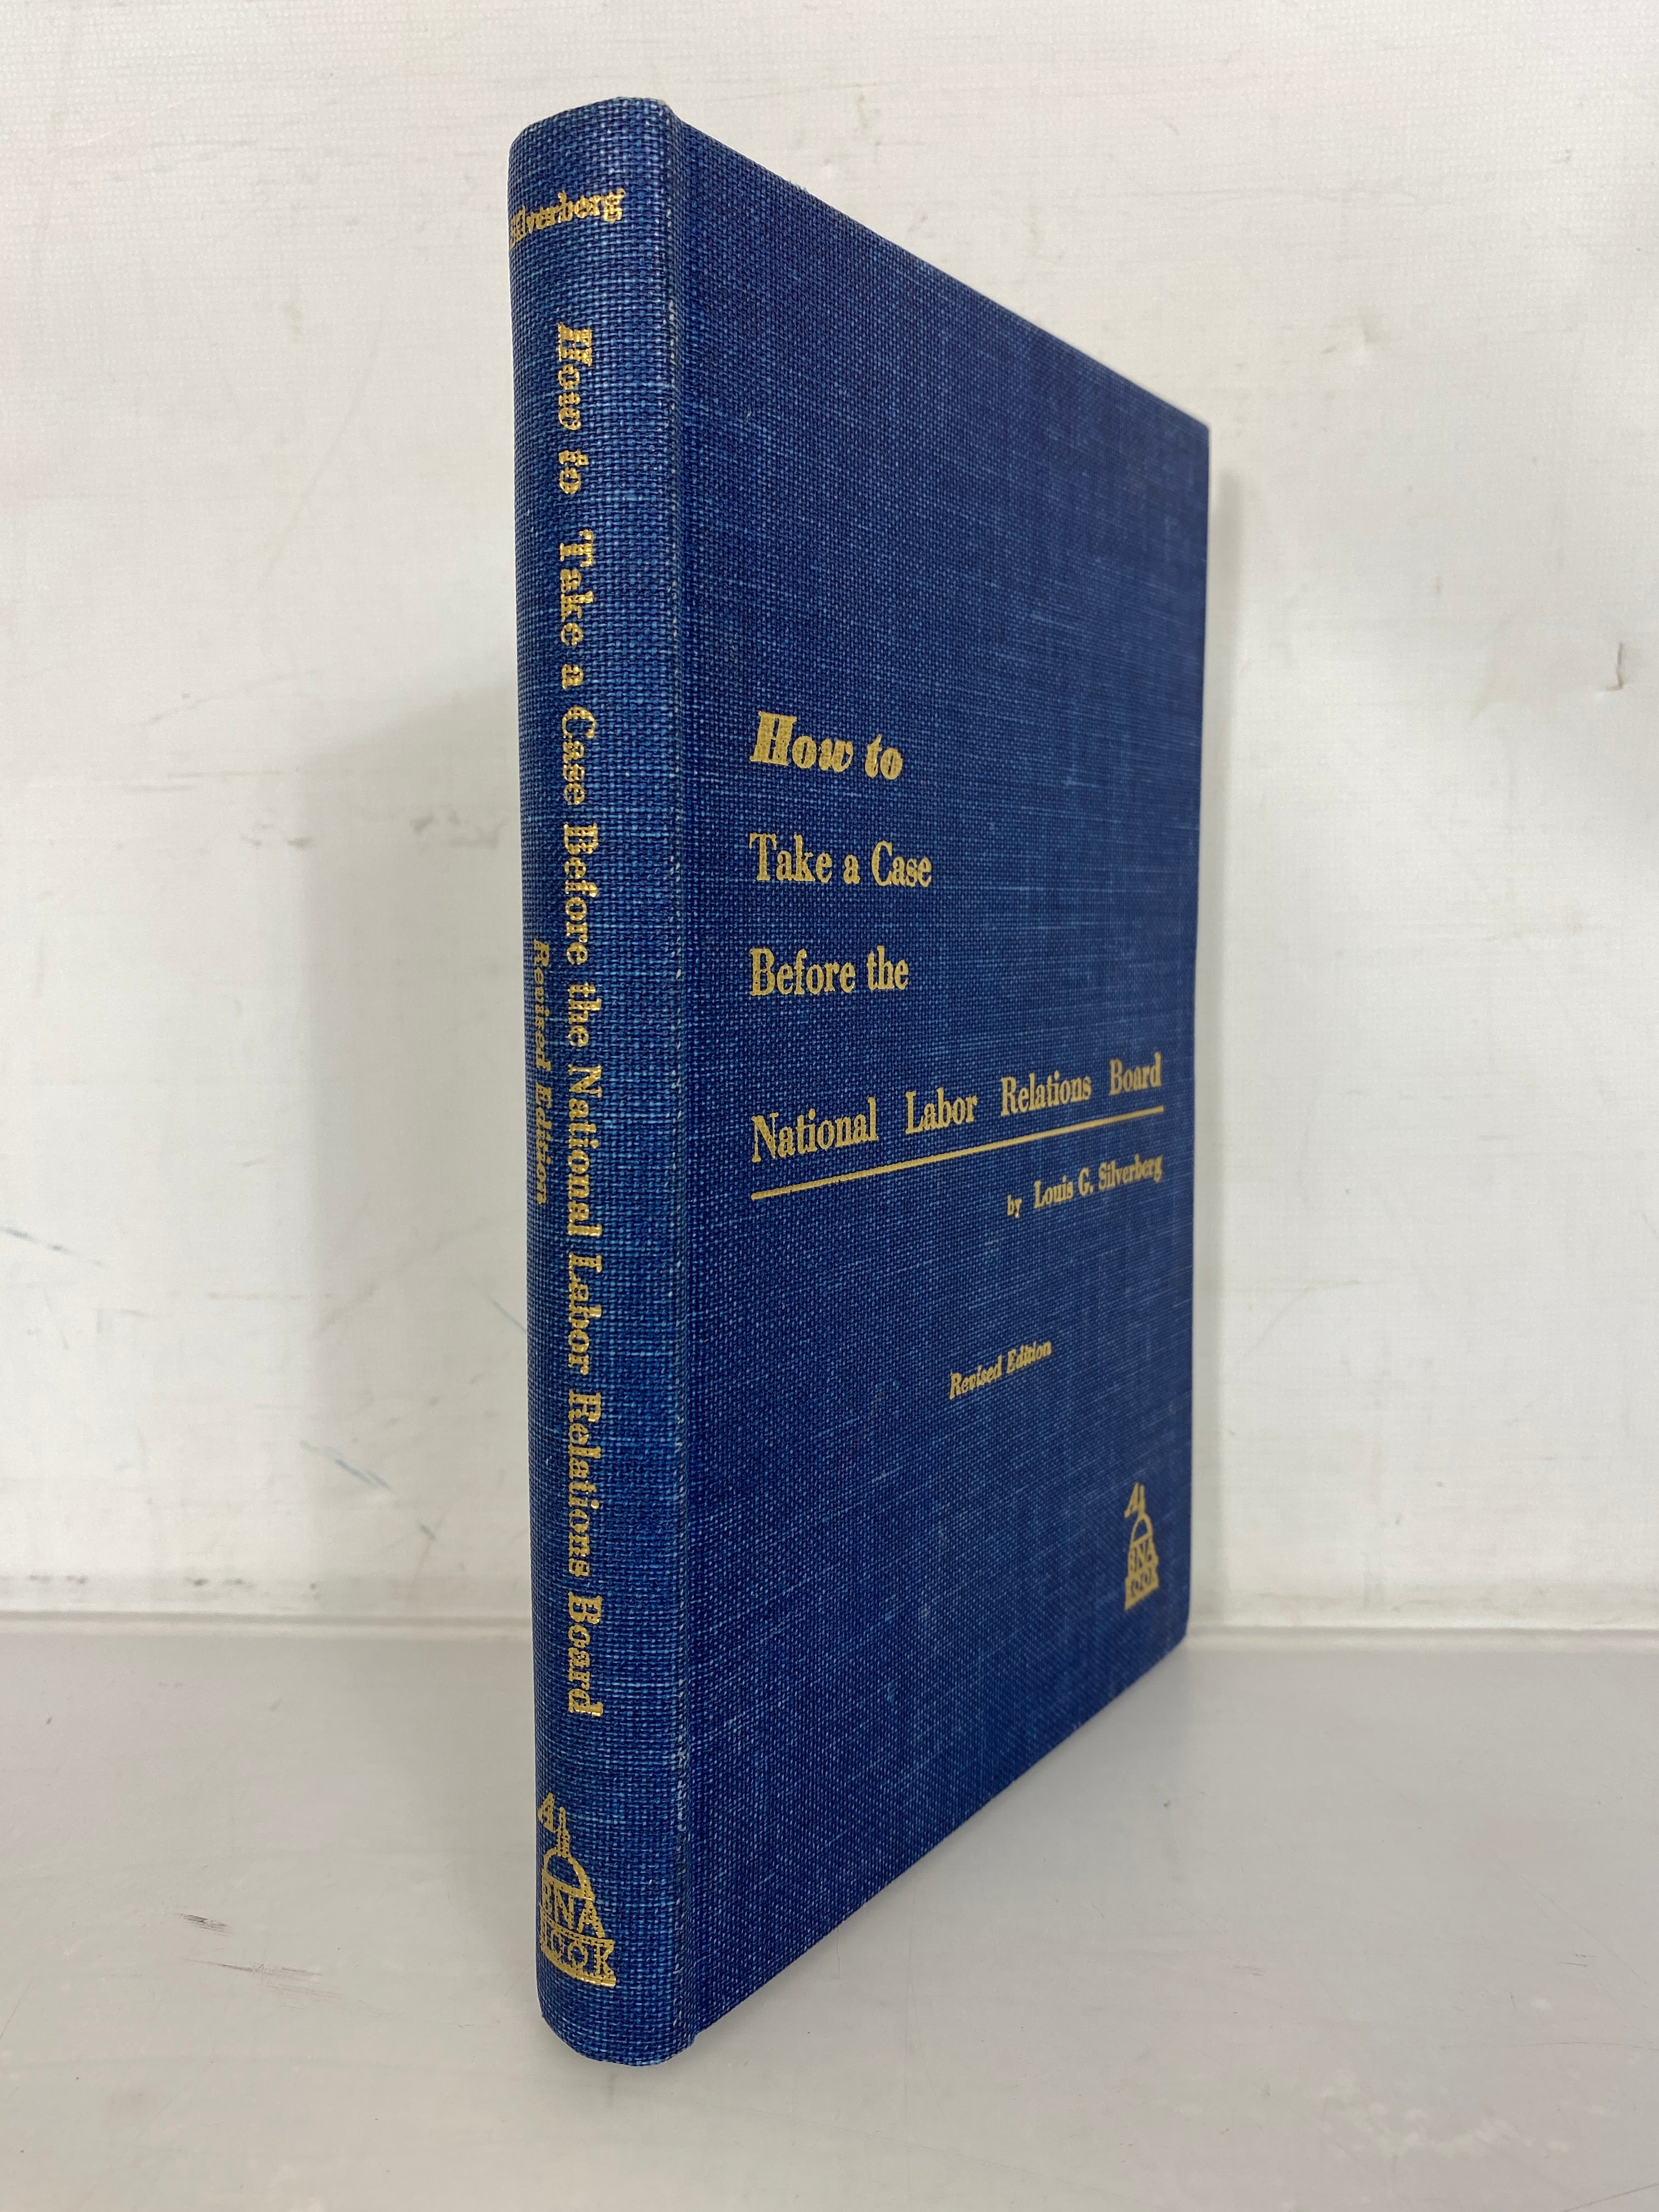 How to Take a Case Before the National Labor Relations Board by Louis G. Silverberg 1959 Revised Edition HC